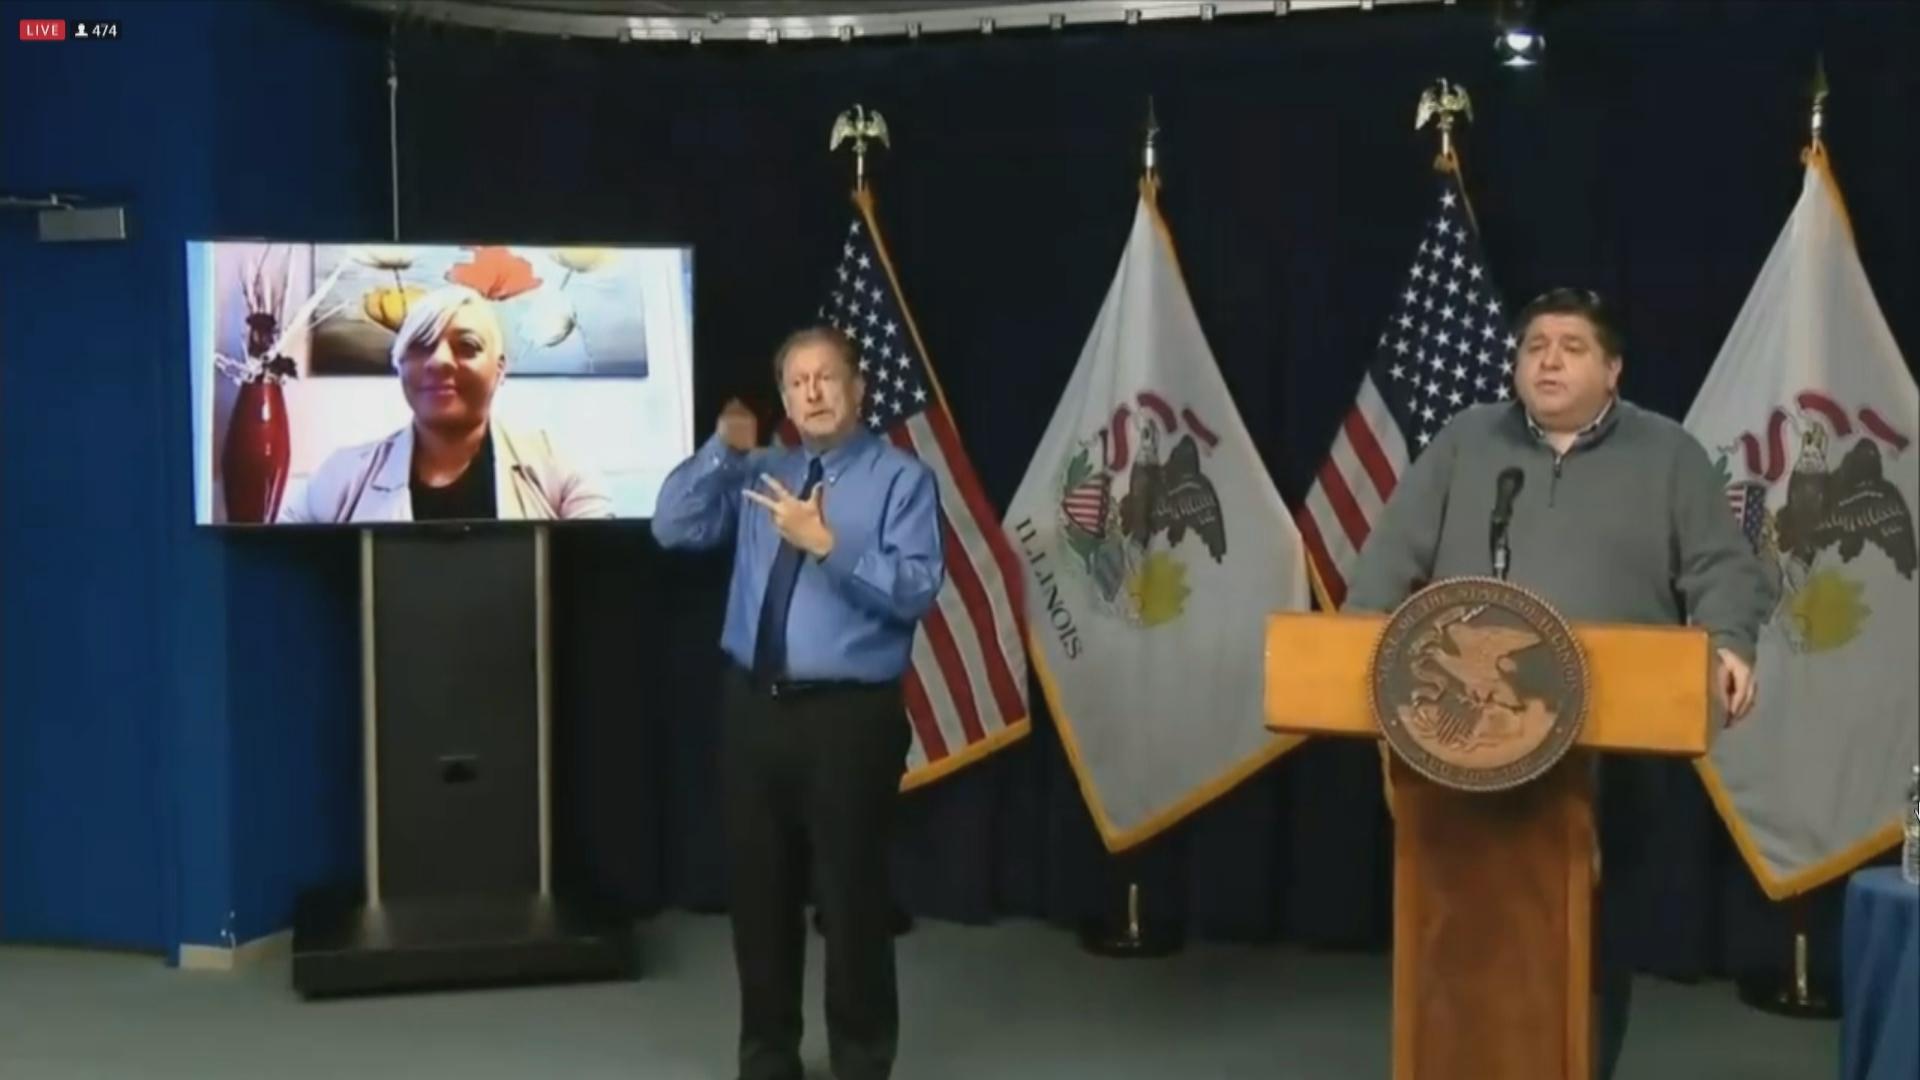 Gov. J.B. Pritzker introduces Steger resident Shanna Siegers during his COVID-19 briefing Tuesday, Dec. 1, 2020. (WTTW News)